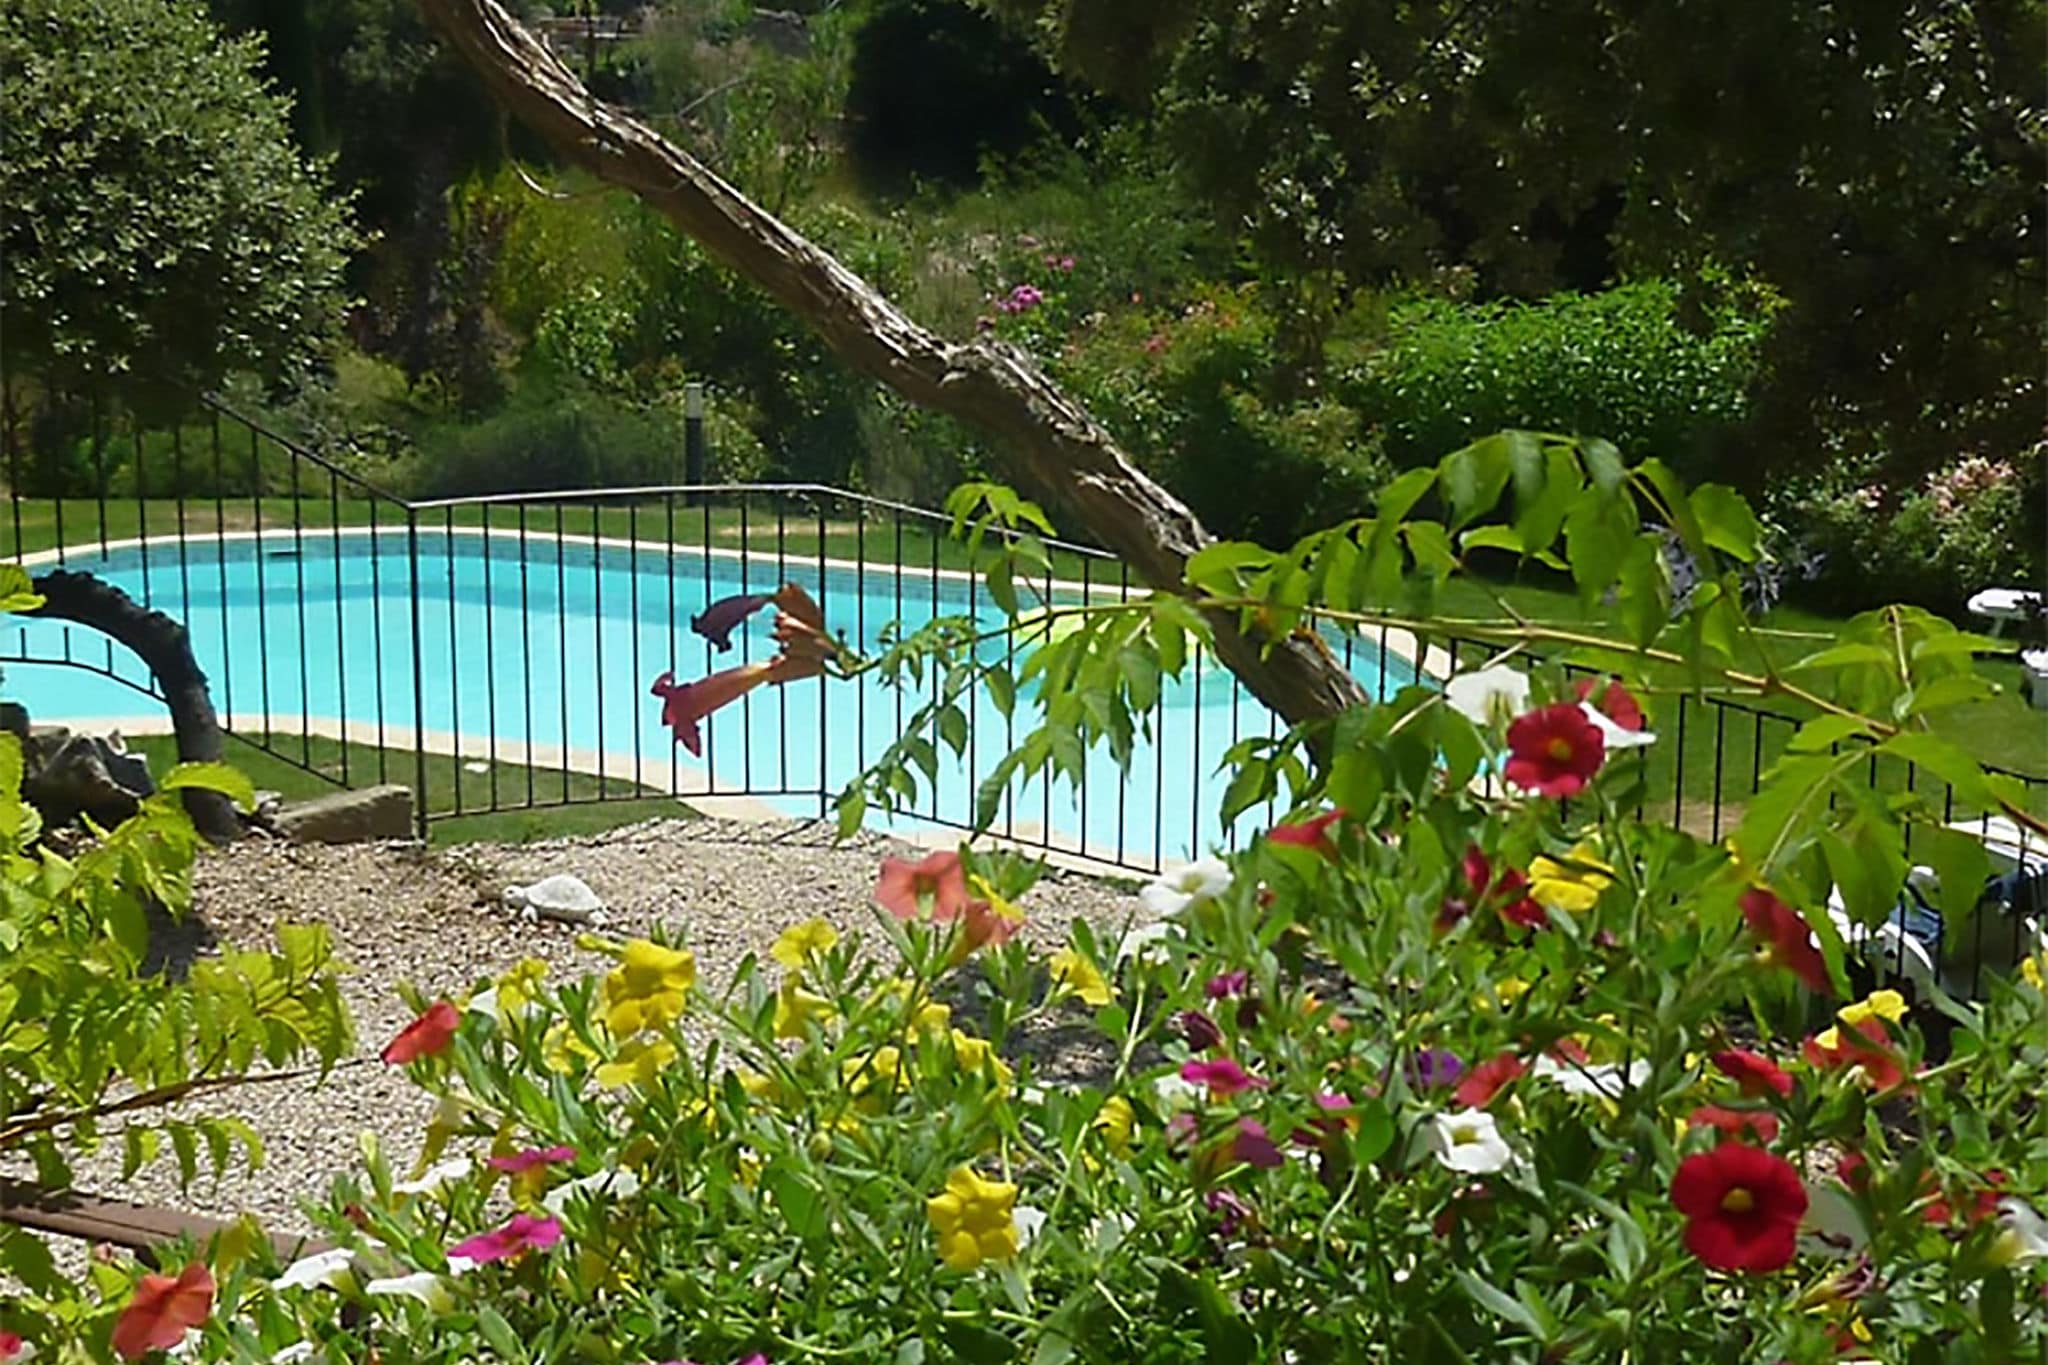 Lovely holiday home with fenced garden and enclosed swimming pool.